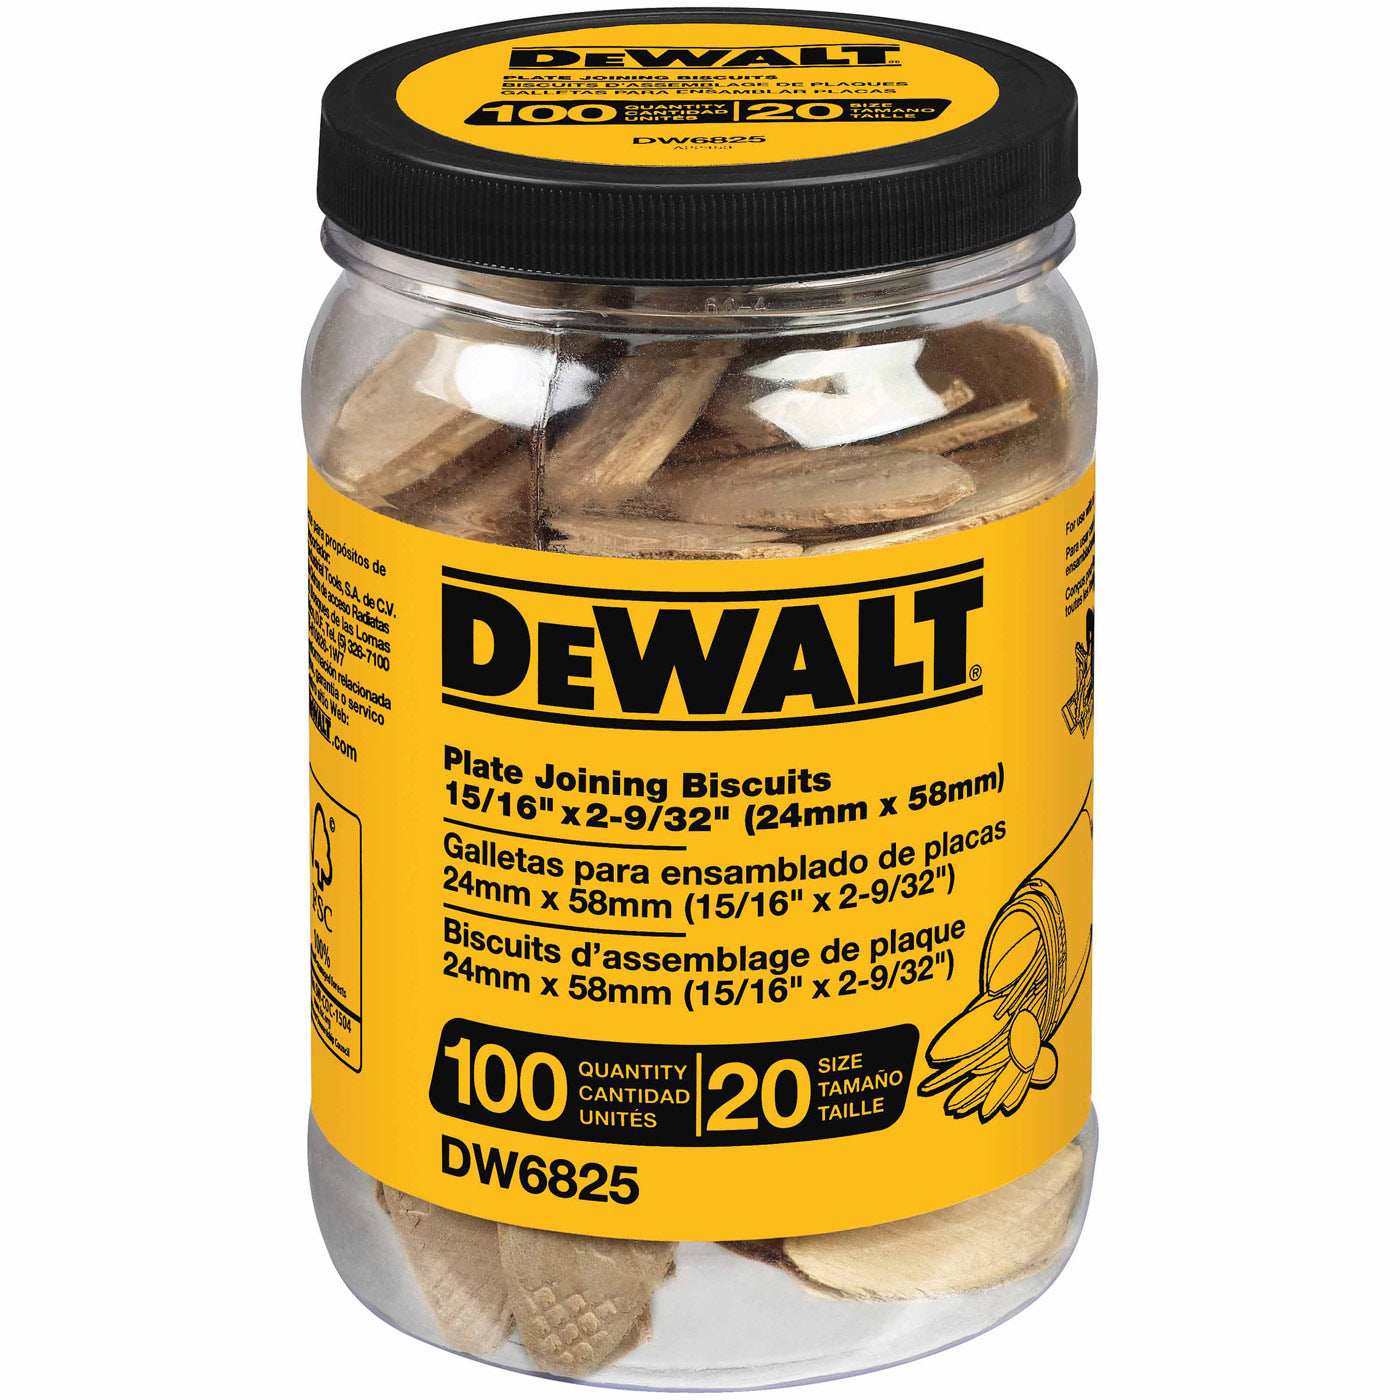 DeWalt DW6825 Size 20 Plate Joining Biscuits (100 Count)